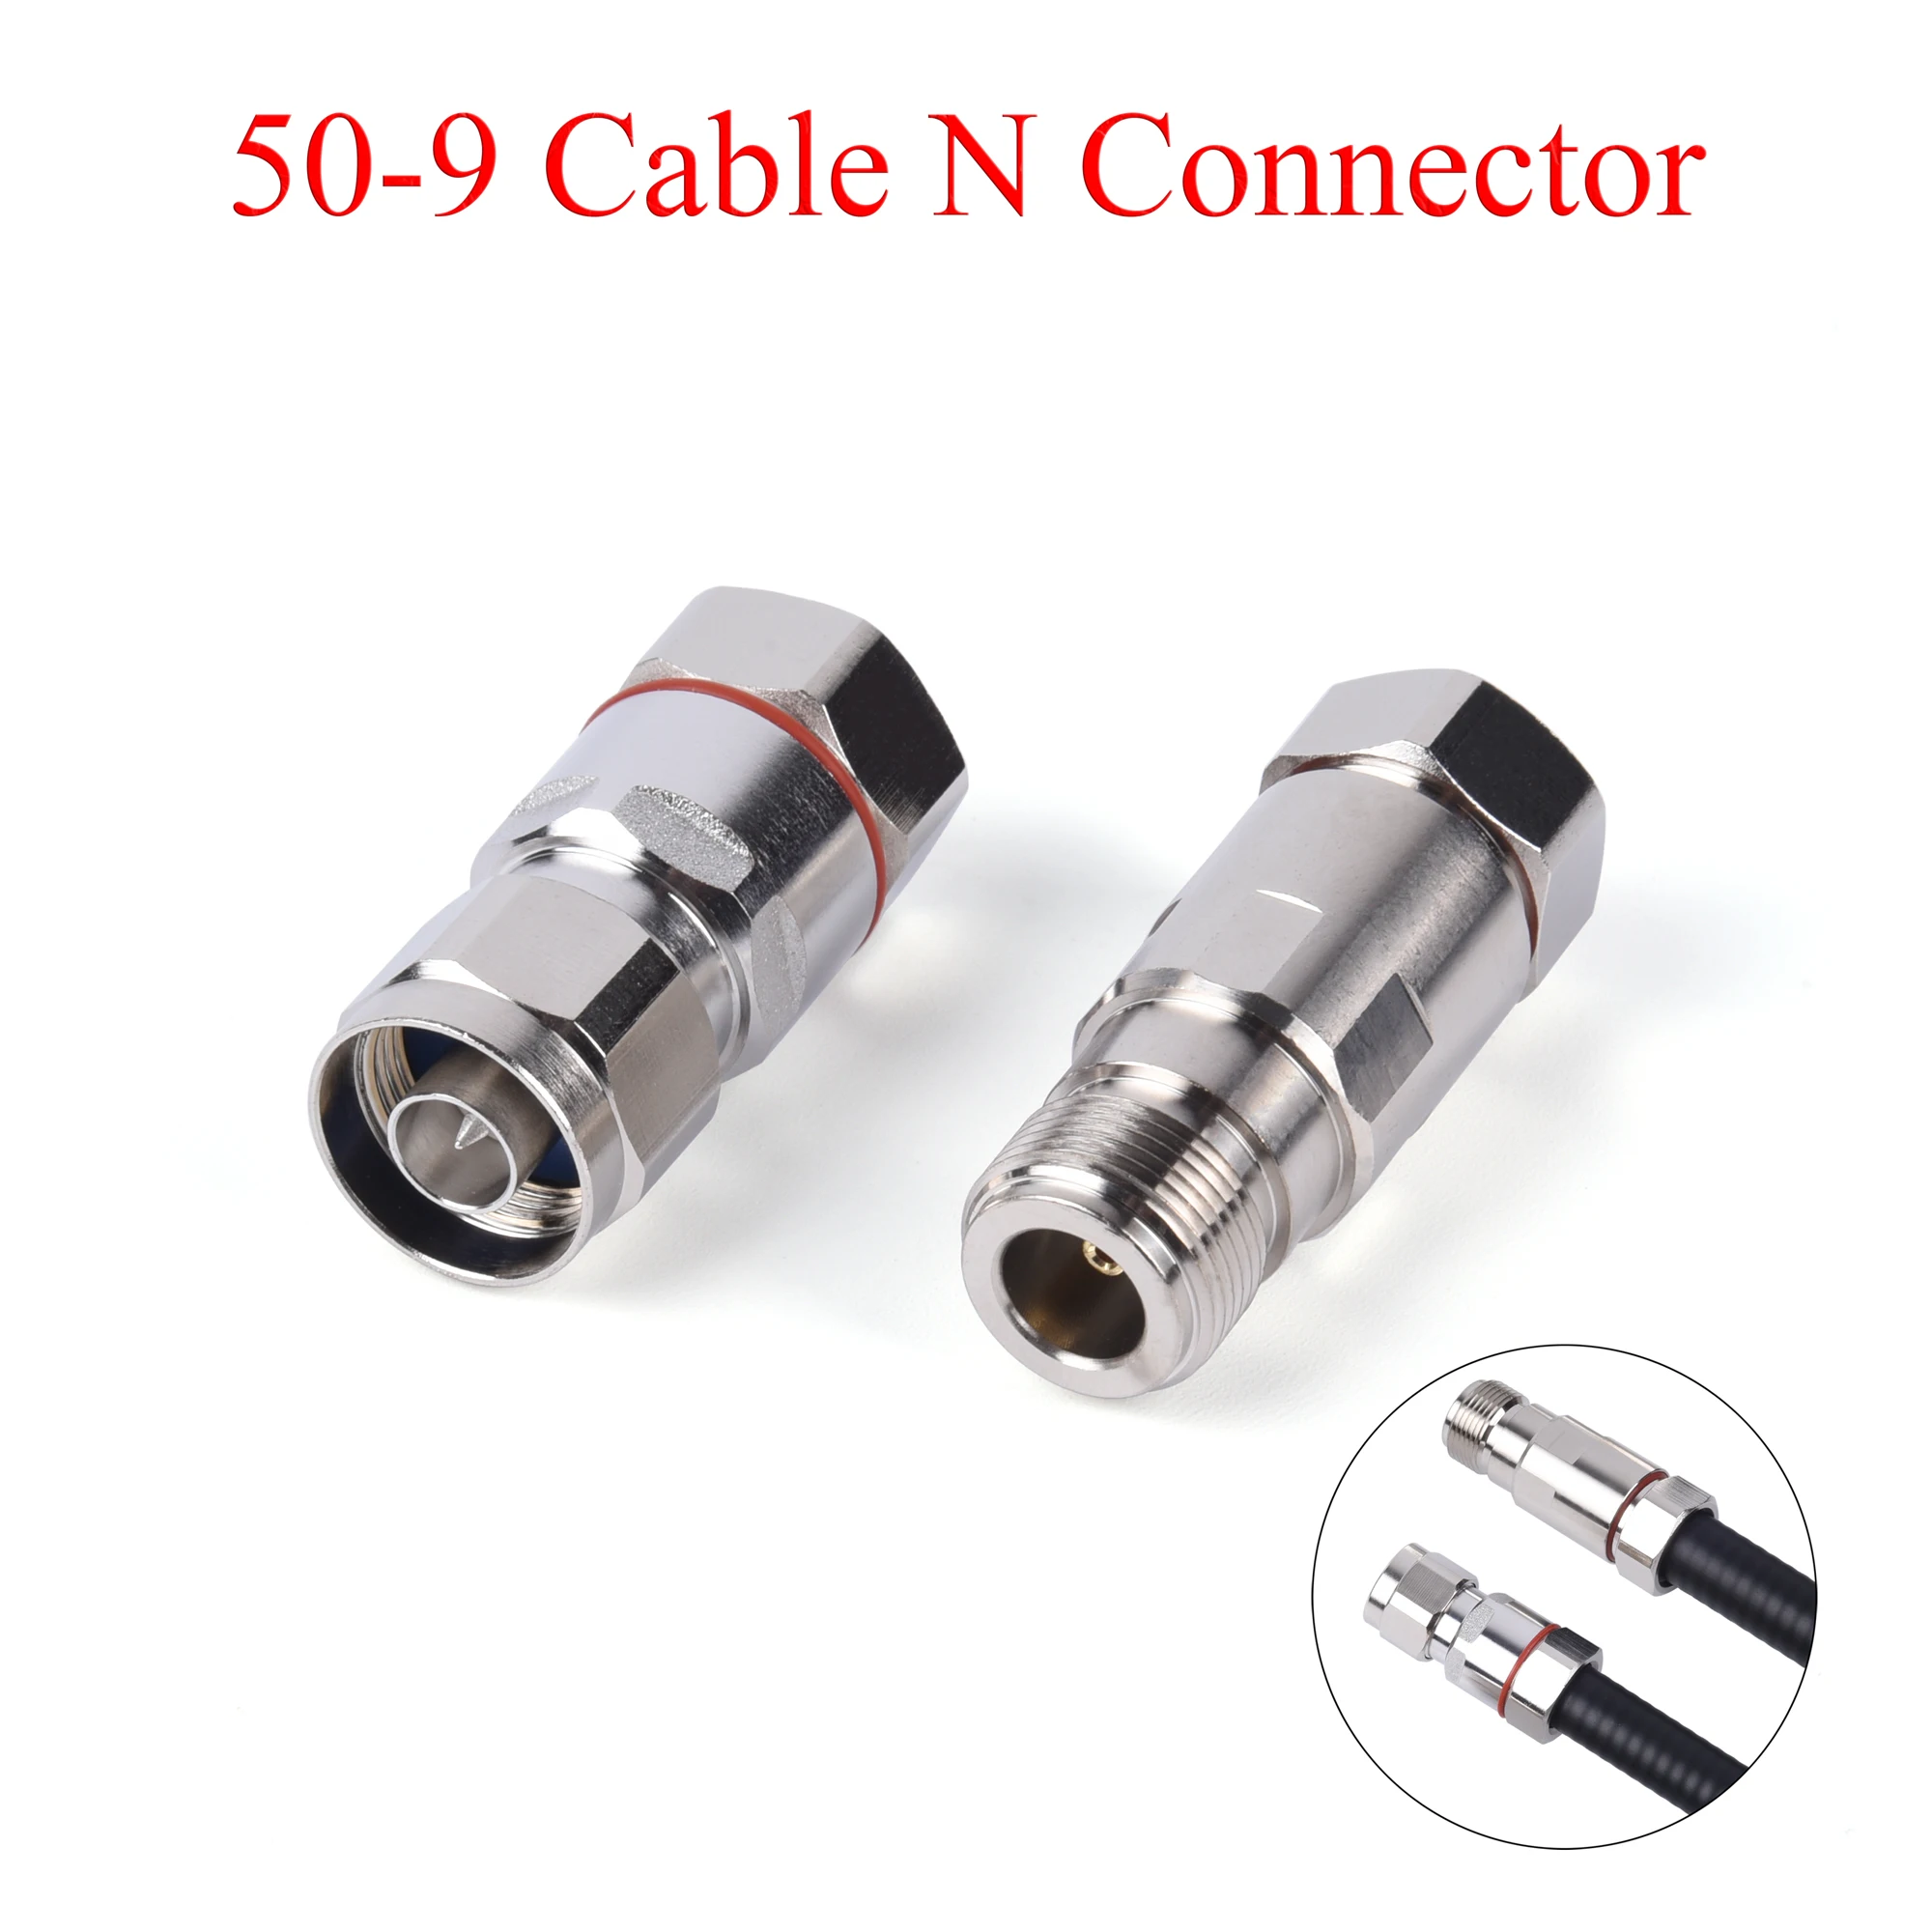 RF Coaxial Connector N Female Jack / Male Plug Socket Clamp Adapter Use For 50-9/1/2S Cable